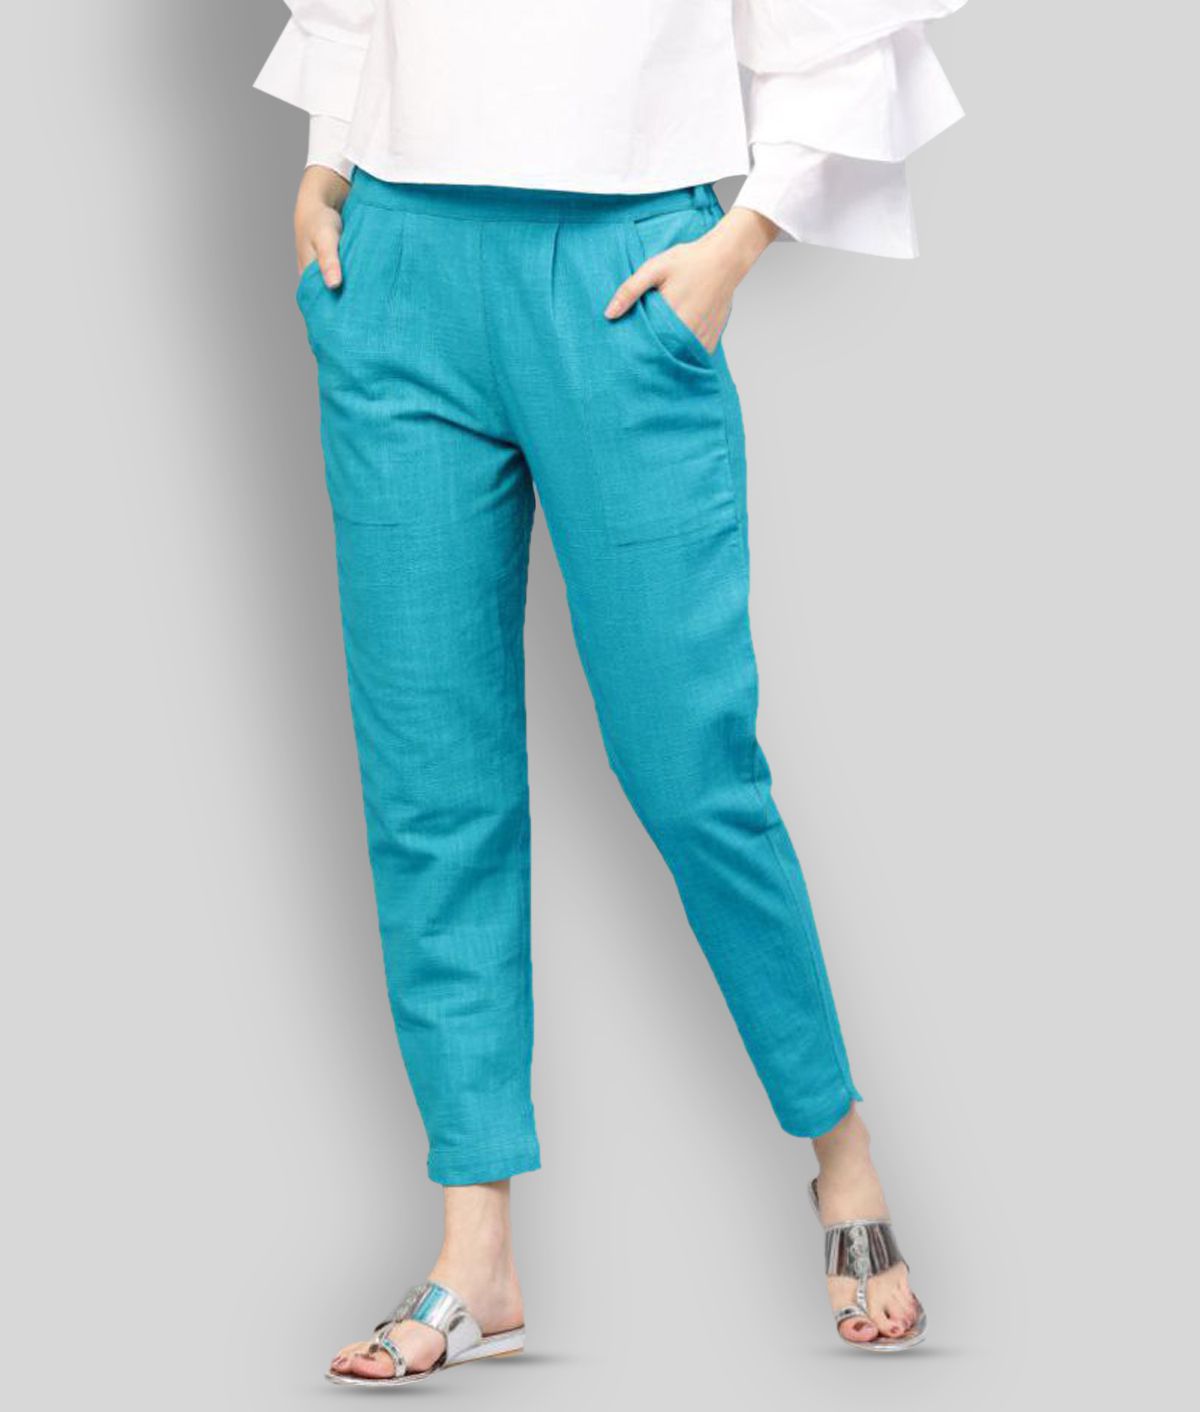 Jaipur Kurti - Turquoise Cotton Blend Straight Fit Women's Casual Pants  ( Pack of 1 )